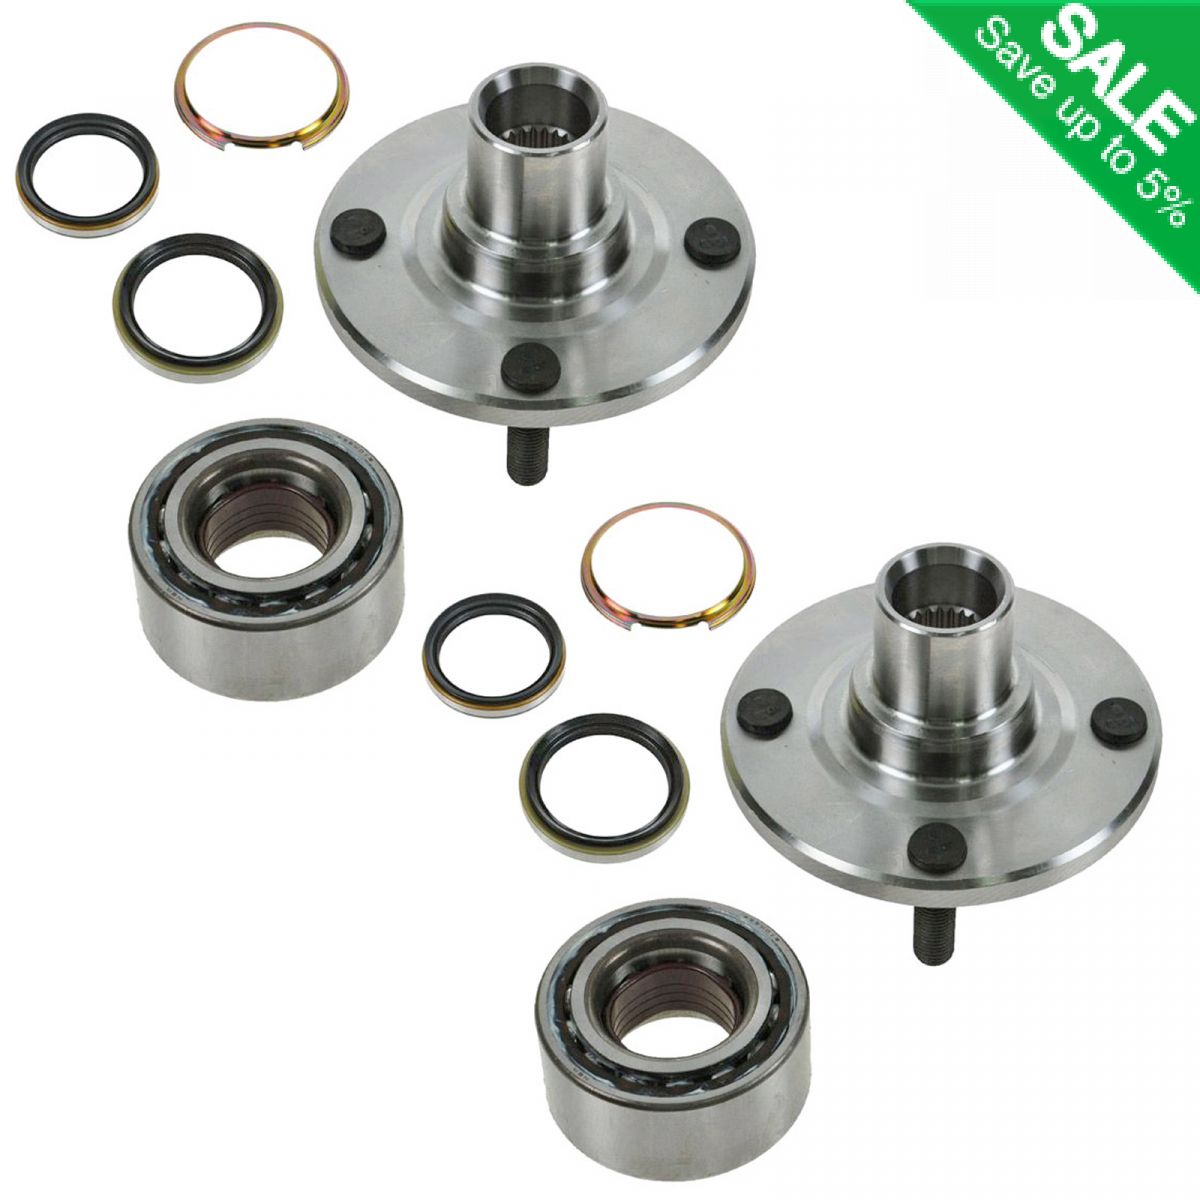 Hub Bearing for 2001 Chevrolet Impala WITH 4 WHEEL ABS-Front Pair